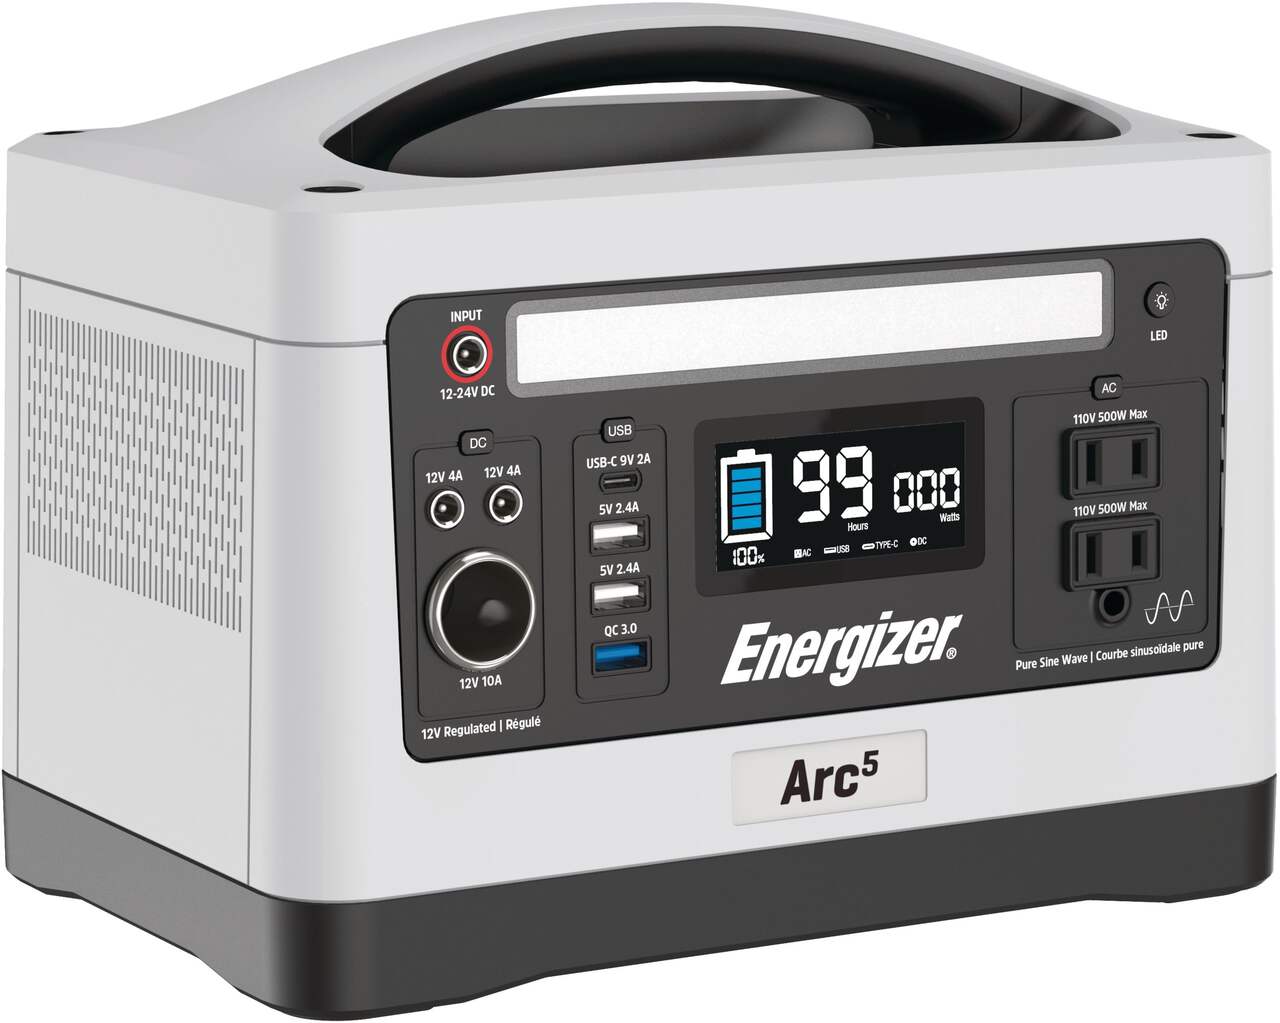 Energizer Arc5 500Wh Lithium-Ion Portable Power Station